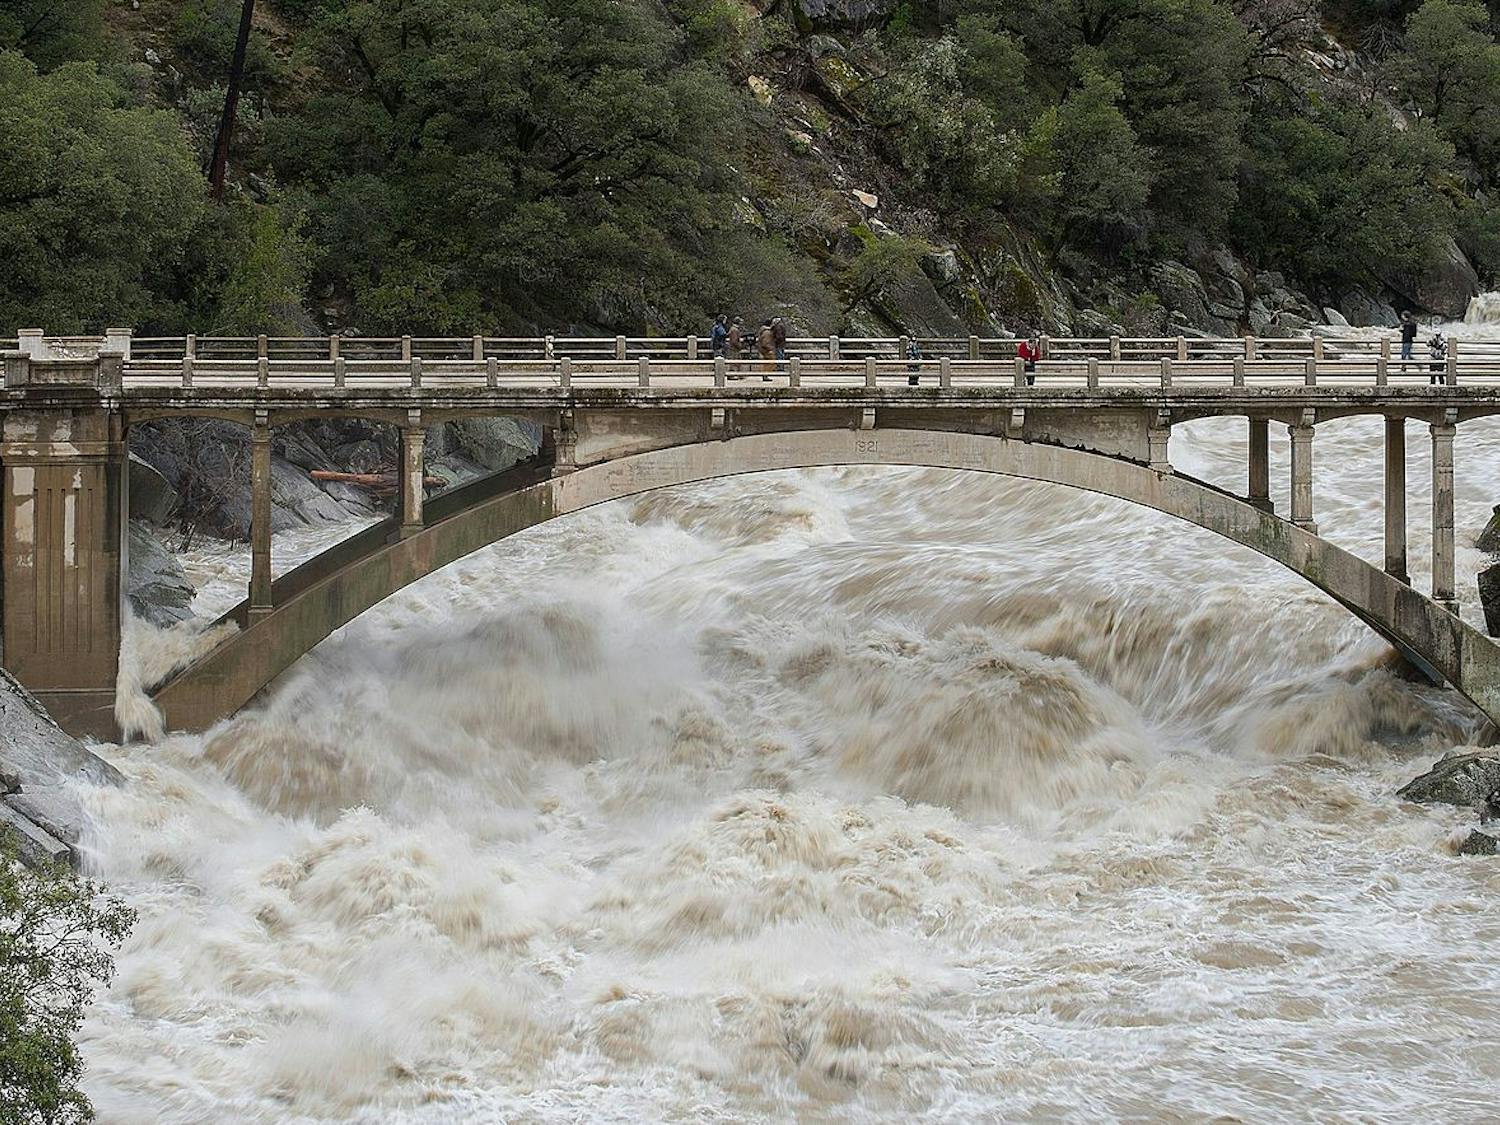 Just one month into the new year, people are already experiencing intense flooding and destruction across California as homes and schools are left as debris (Photo courtesy of Wikimedia Commons / “Flood under the Old Route 49 bridge crossing over the South Yuba River in Nevada City, California” by Kelly M. Grow/ California Department of Water Resources. PD California. January 9, 2017). 